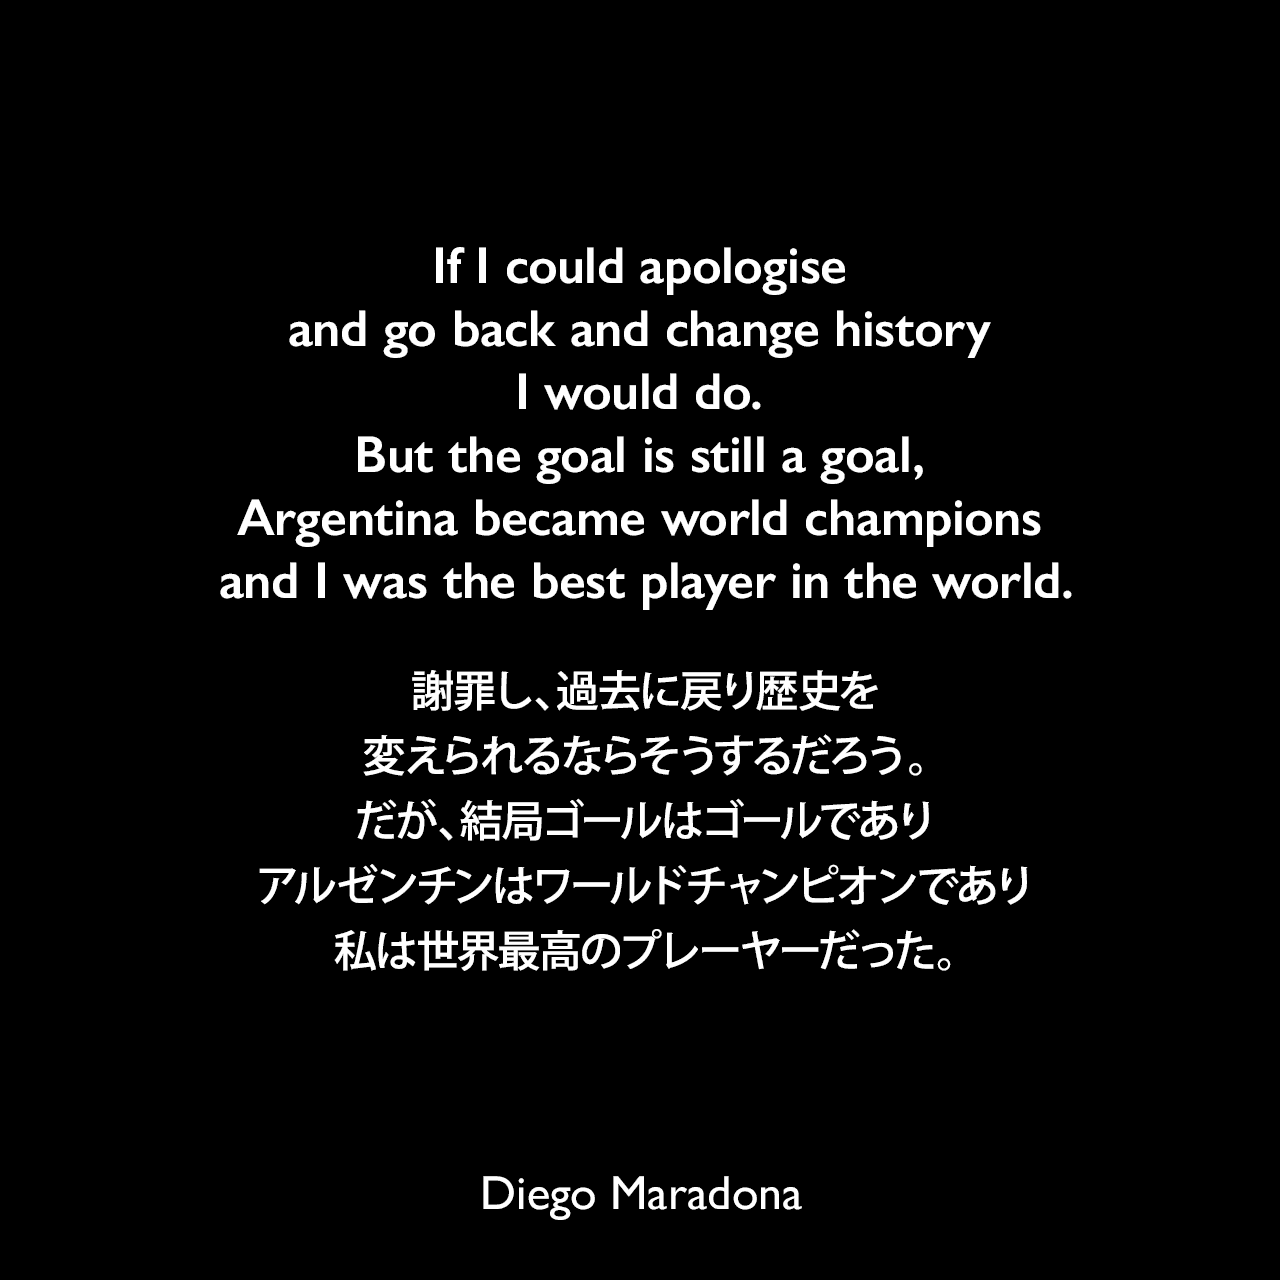 If I could apologise and go back and change history I would do. But the goal is still a goal, Argentina became world champions and I was the best player in the world.謝罪し、過去に戻り歴史を変えられるならそうするだろう。だが、結局ゴールはゴールであり、アルゼンチンはワールドチャンピオンであり、私は世界最高のプレーヤーだった。Diego Maradona